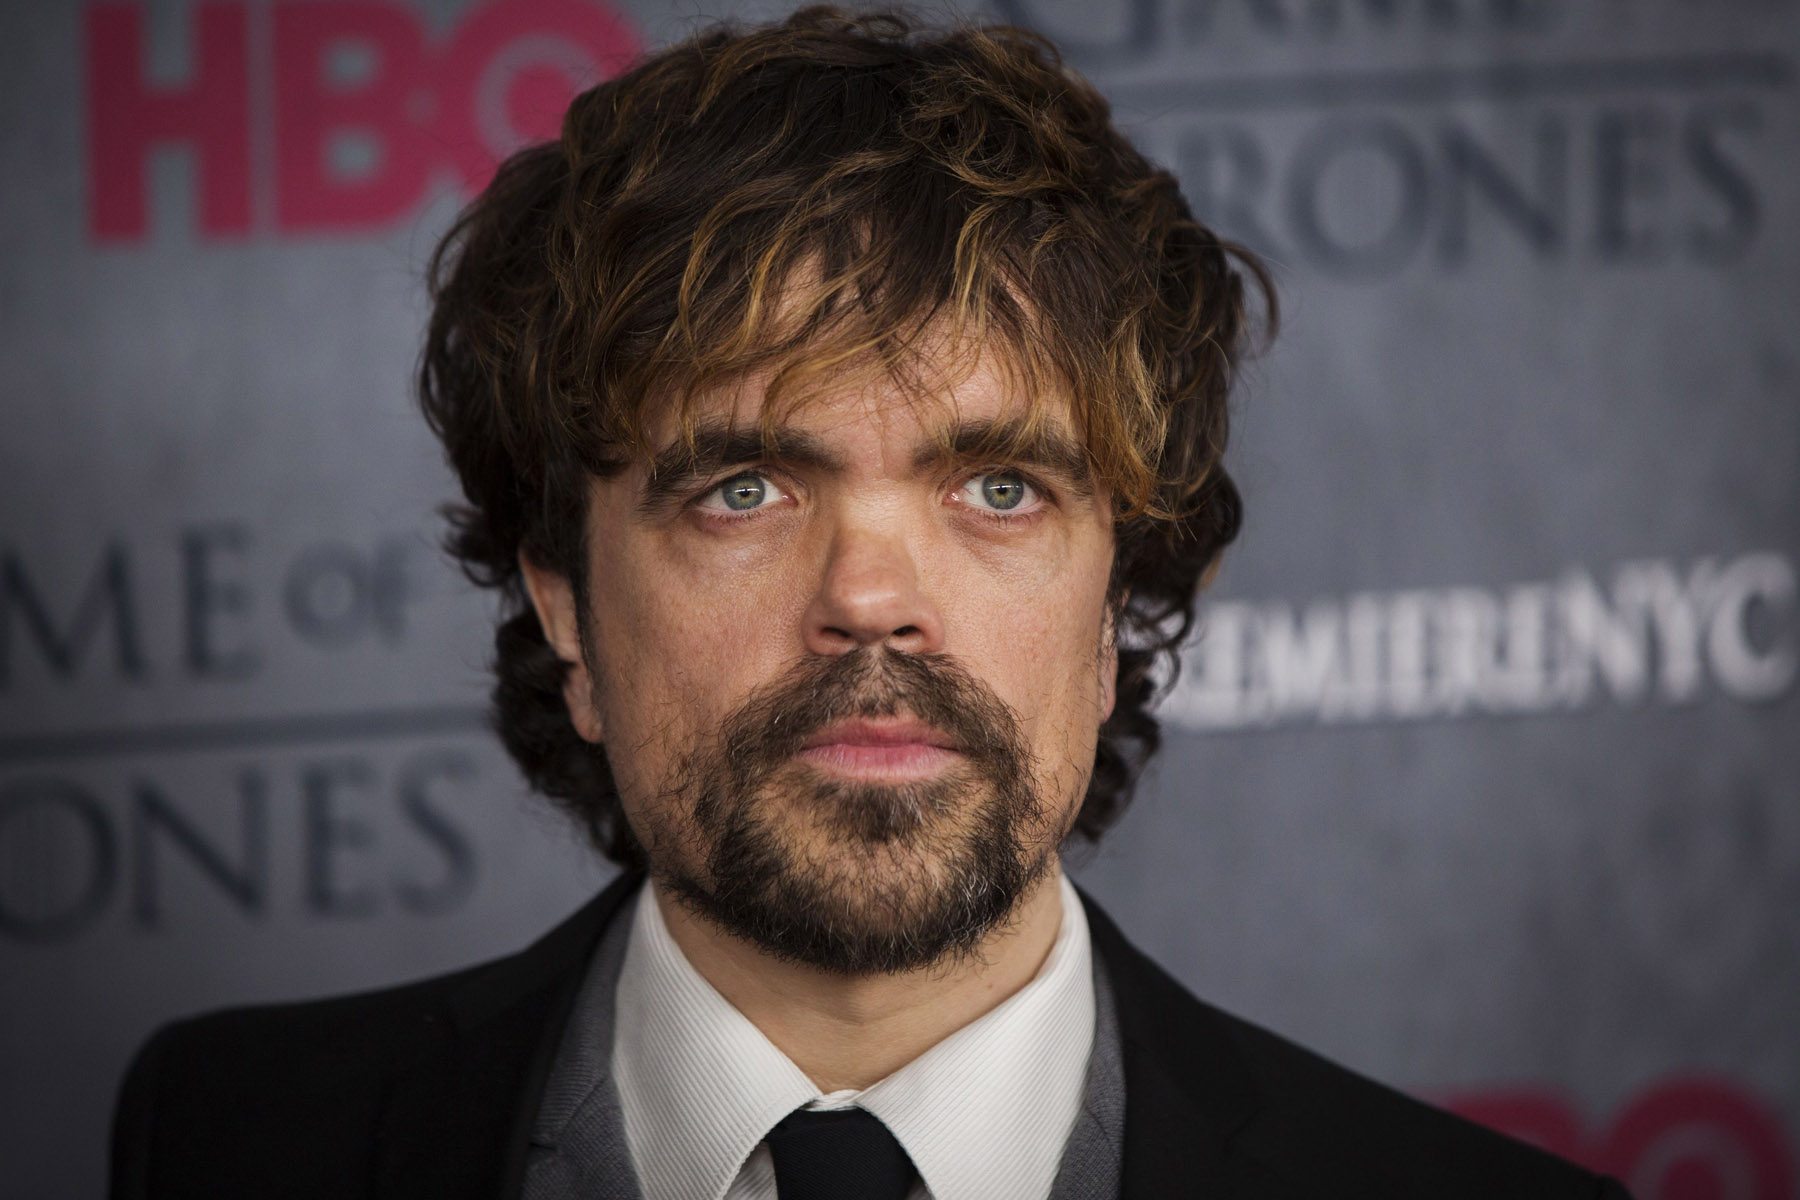 Cast member Peter Dinklage arrives for the premiere of the HBO series "Game of Thrones" in New York March 18, 2014. REUTERS/Lucas Jackson (UNITED STATES - Tags: ENTERTAINMENT)